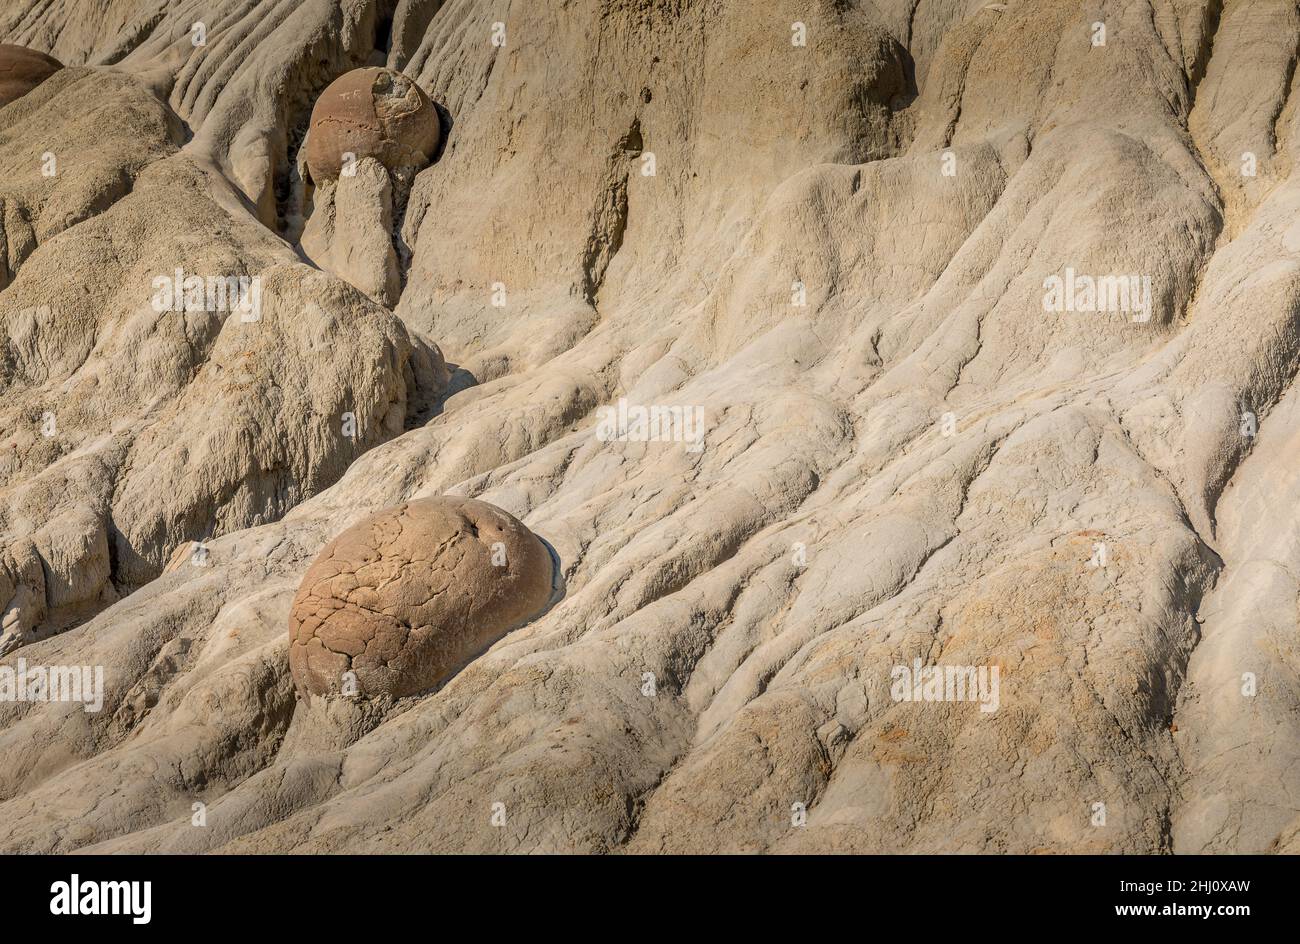 The Cannonball Concretions in the Theodore Roosevelt National Park Stock Photo